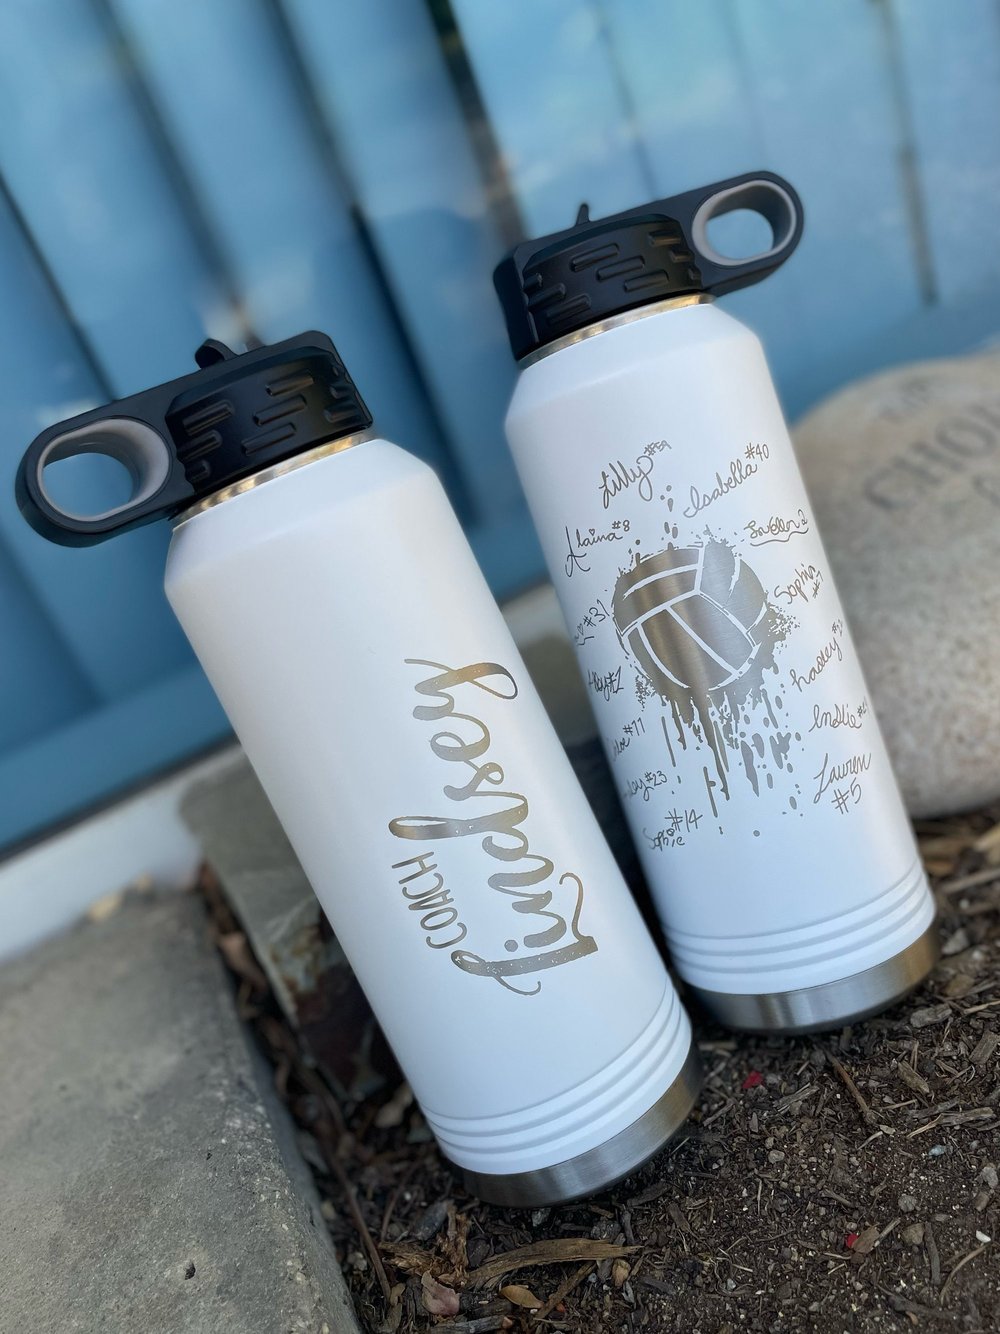 Engraved 40 oz (1.18 l) Thermoflask Water Bottle – Gold Camp Engraving